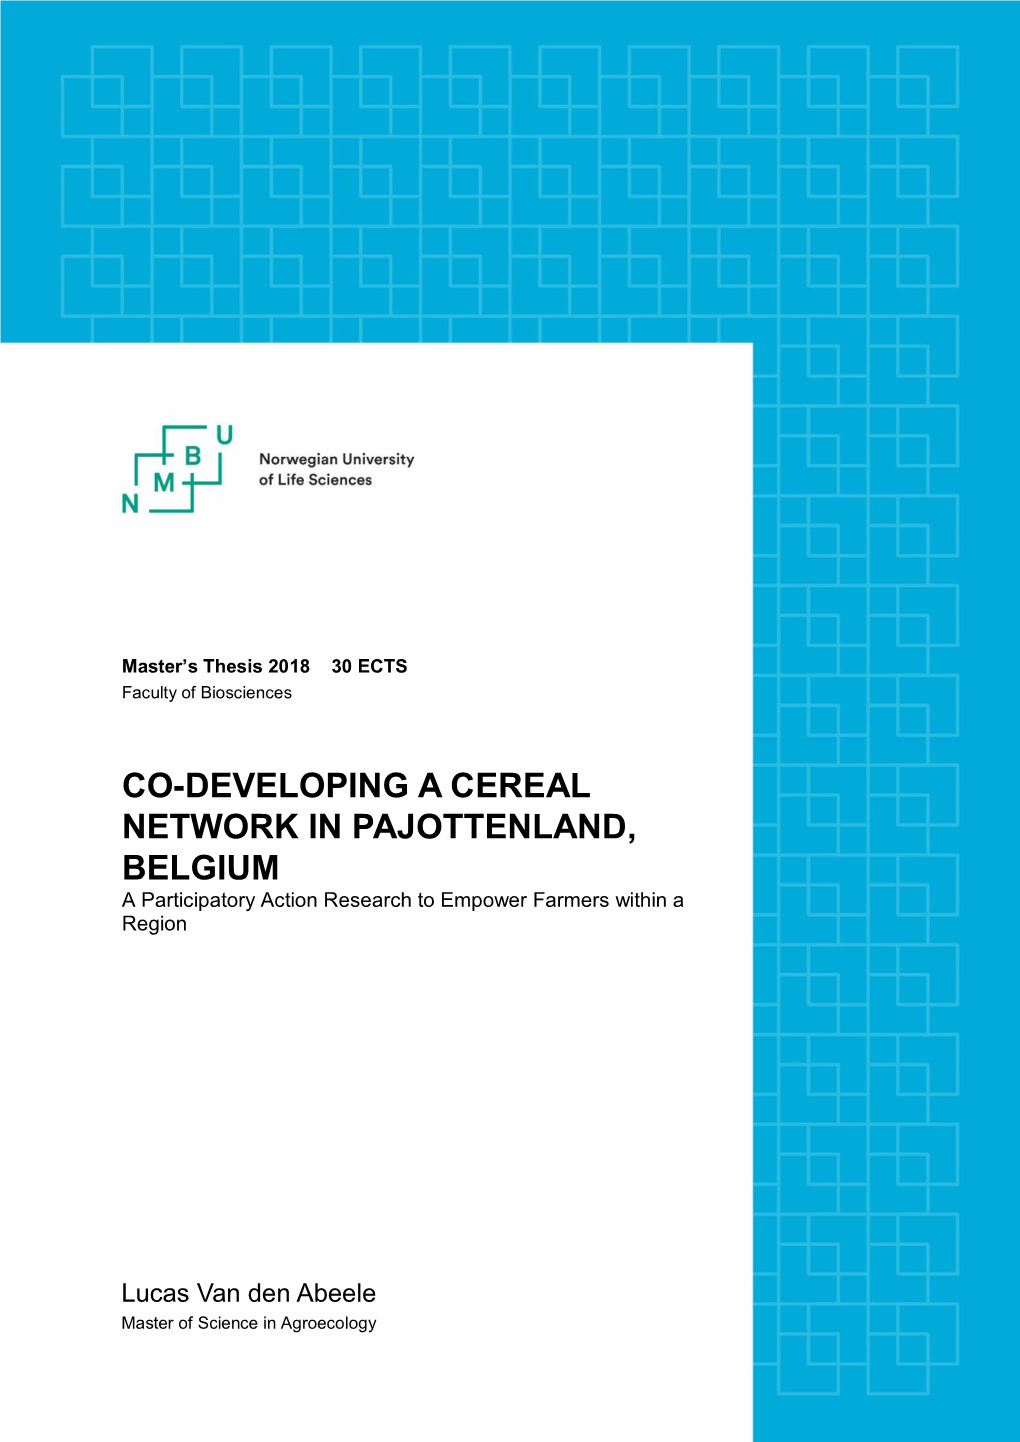 CO-DEVELOPING a CEREAL NETWORK in PAJOTTENLAND, BELGIUM a Participatory Action Research to Empower Farmers Within a Region